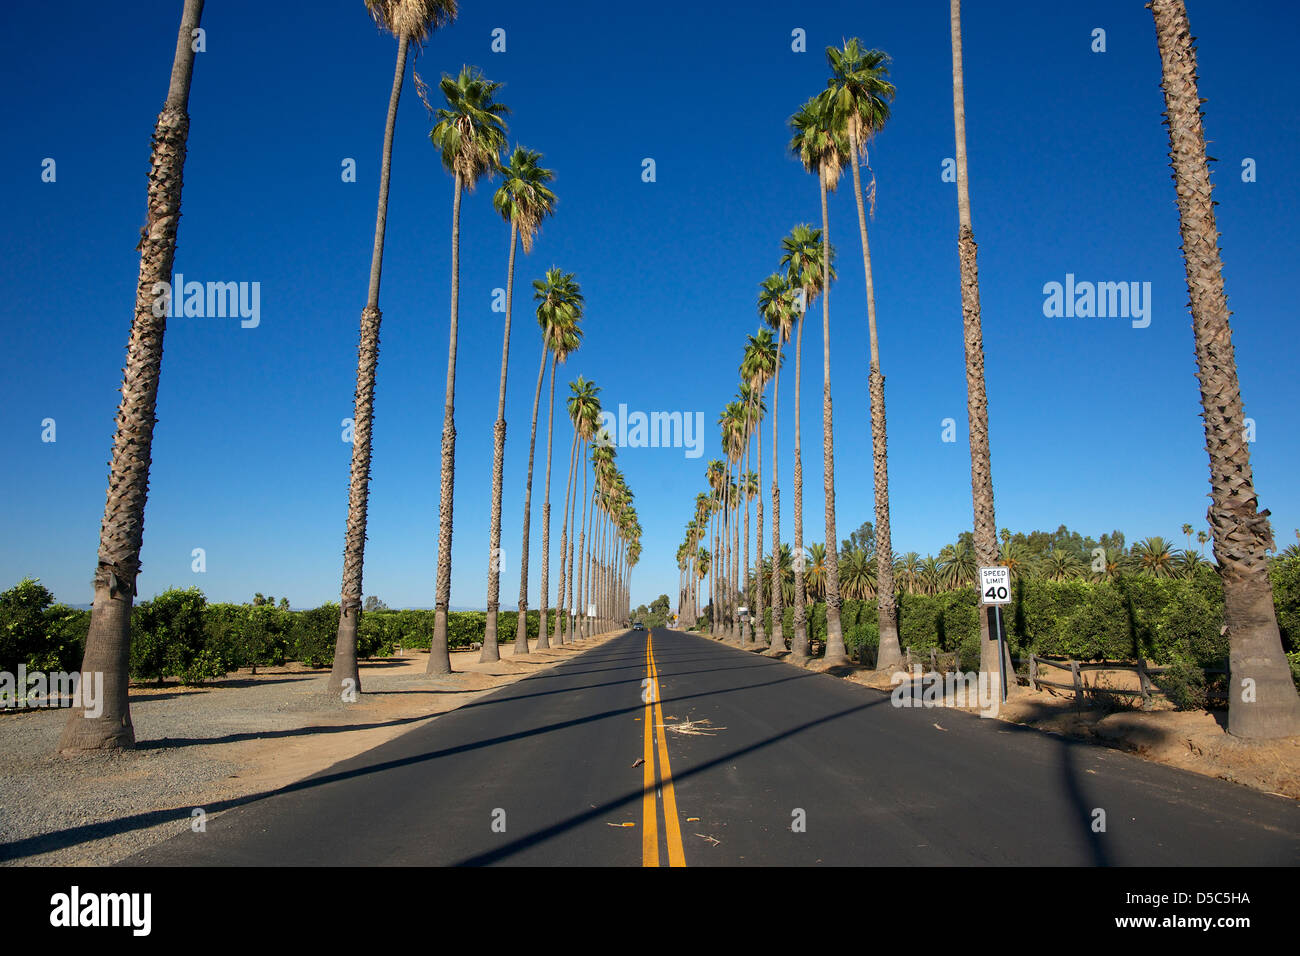 Straight flat newly paved road with palm trees and Orange groves on either side. Stock Photo